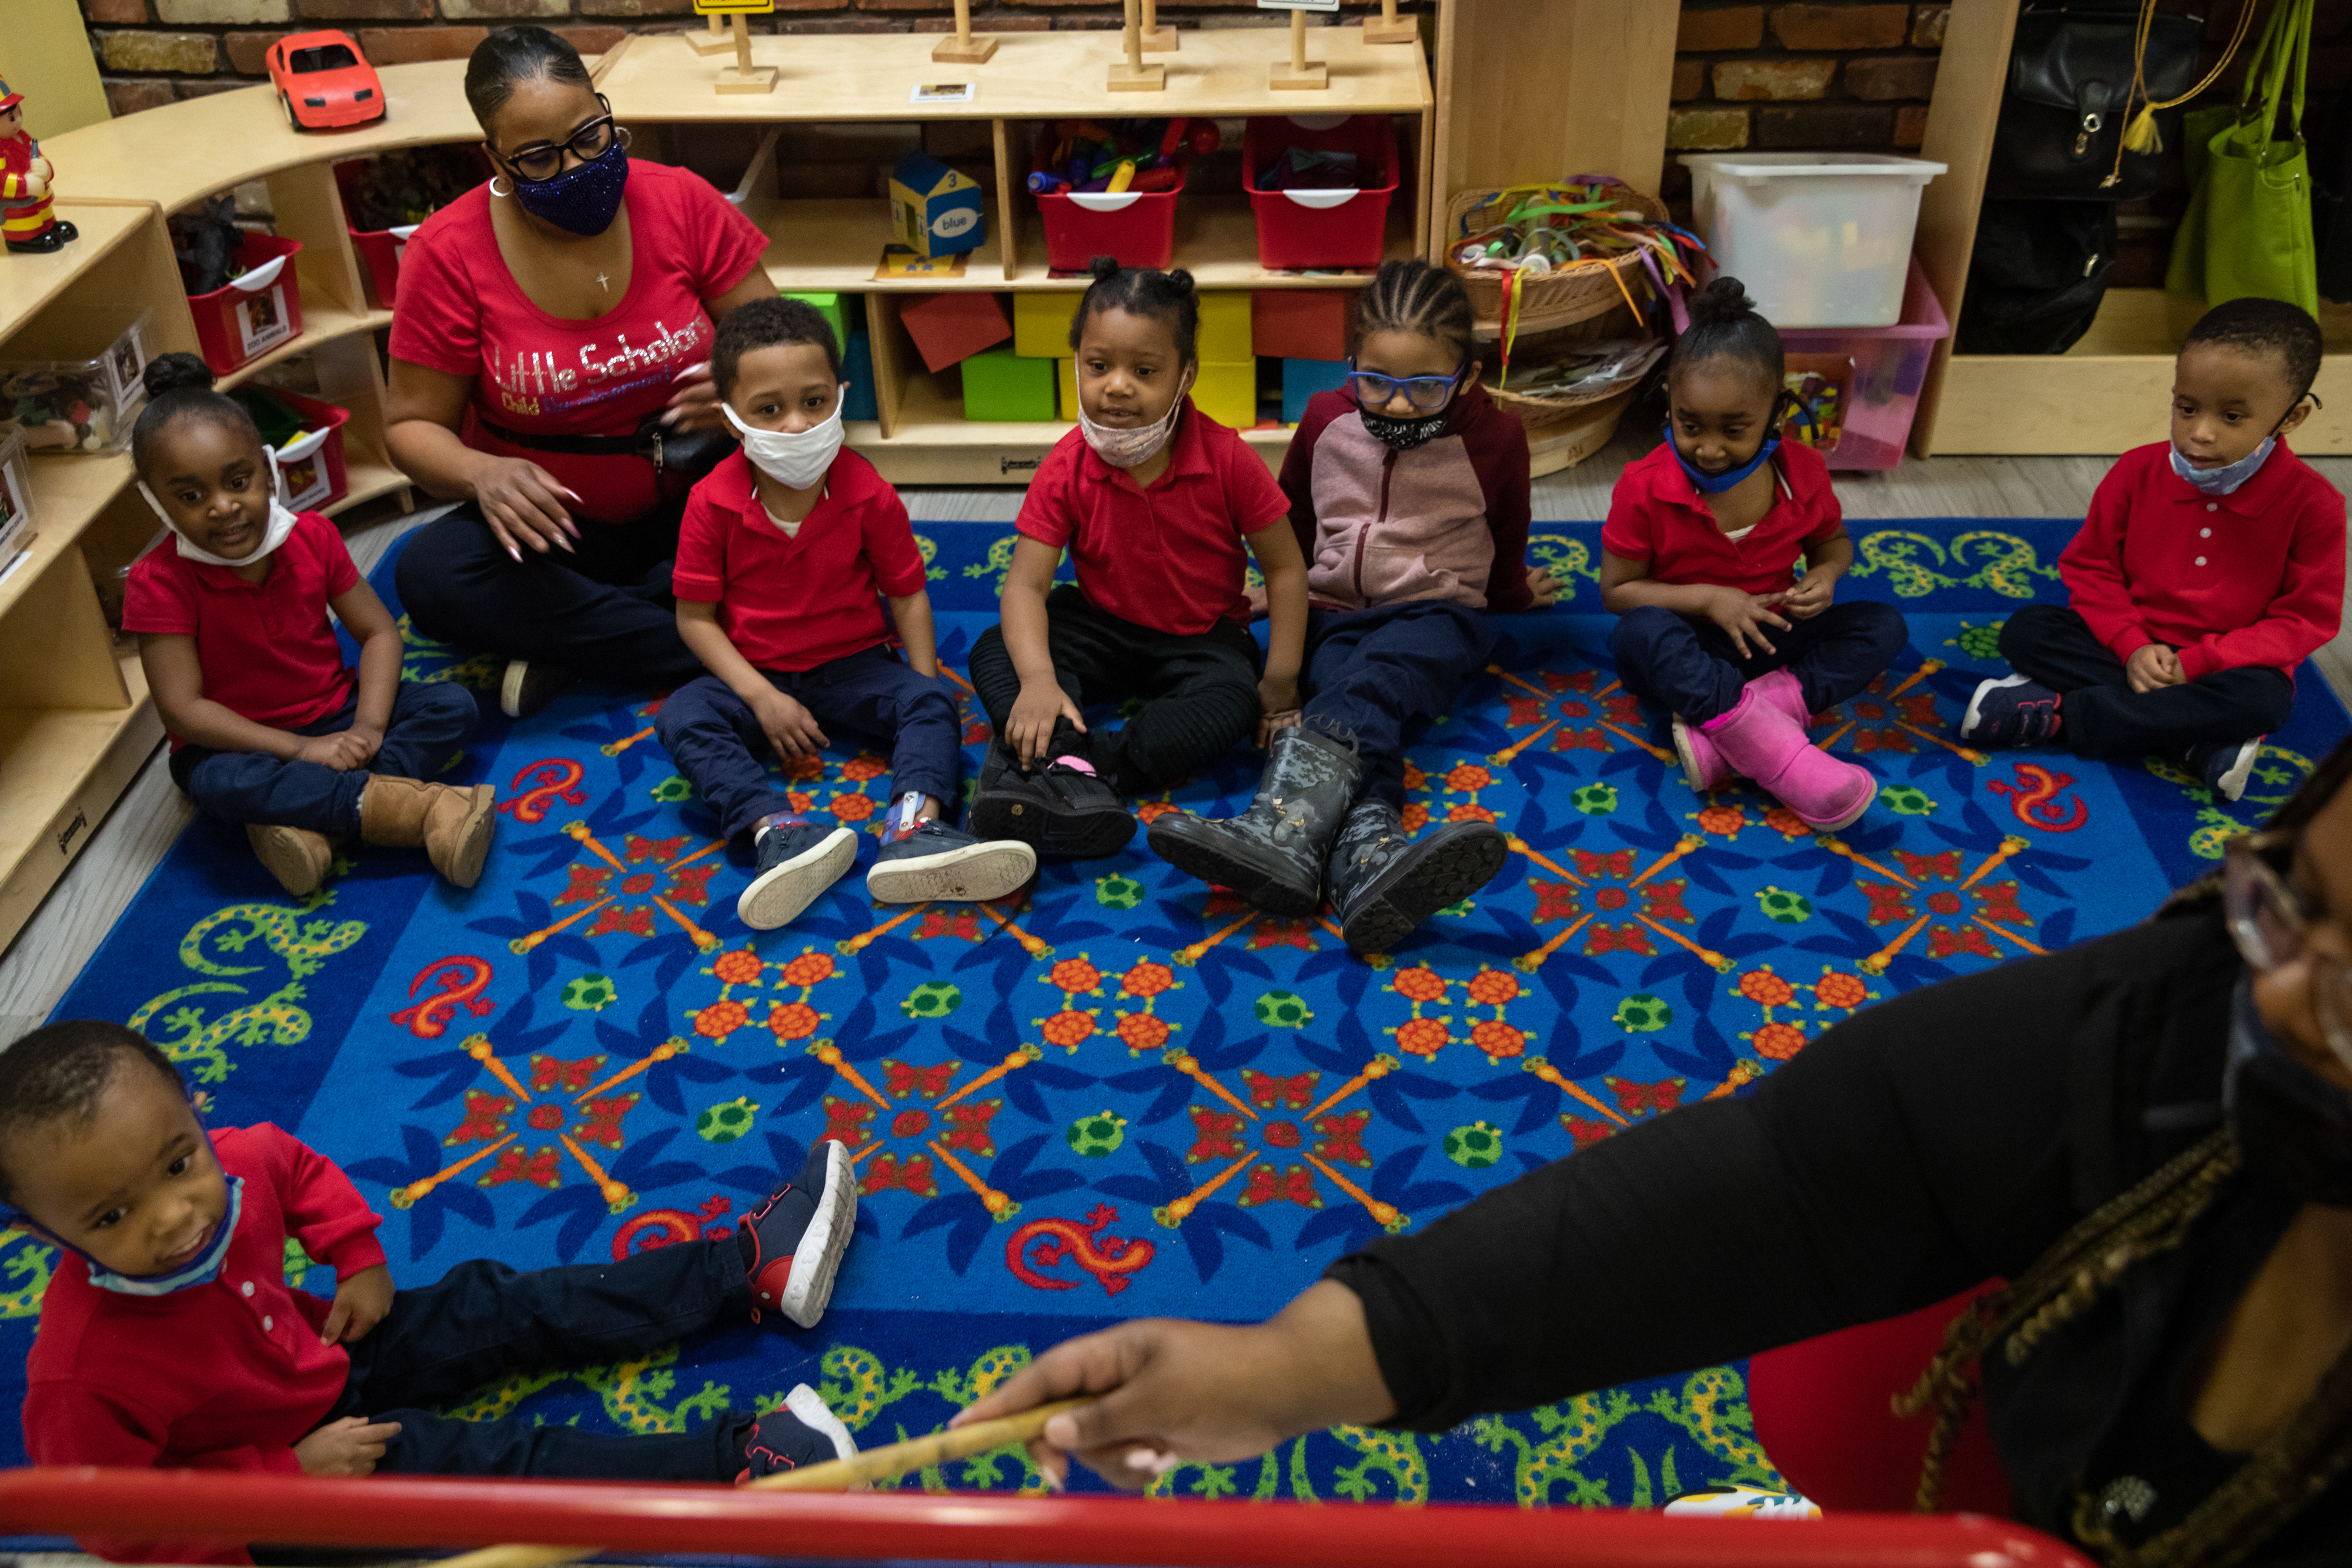 Preschoolers participate in morning exercises at Little Scholars child care center.